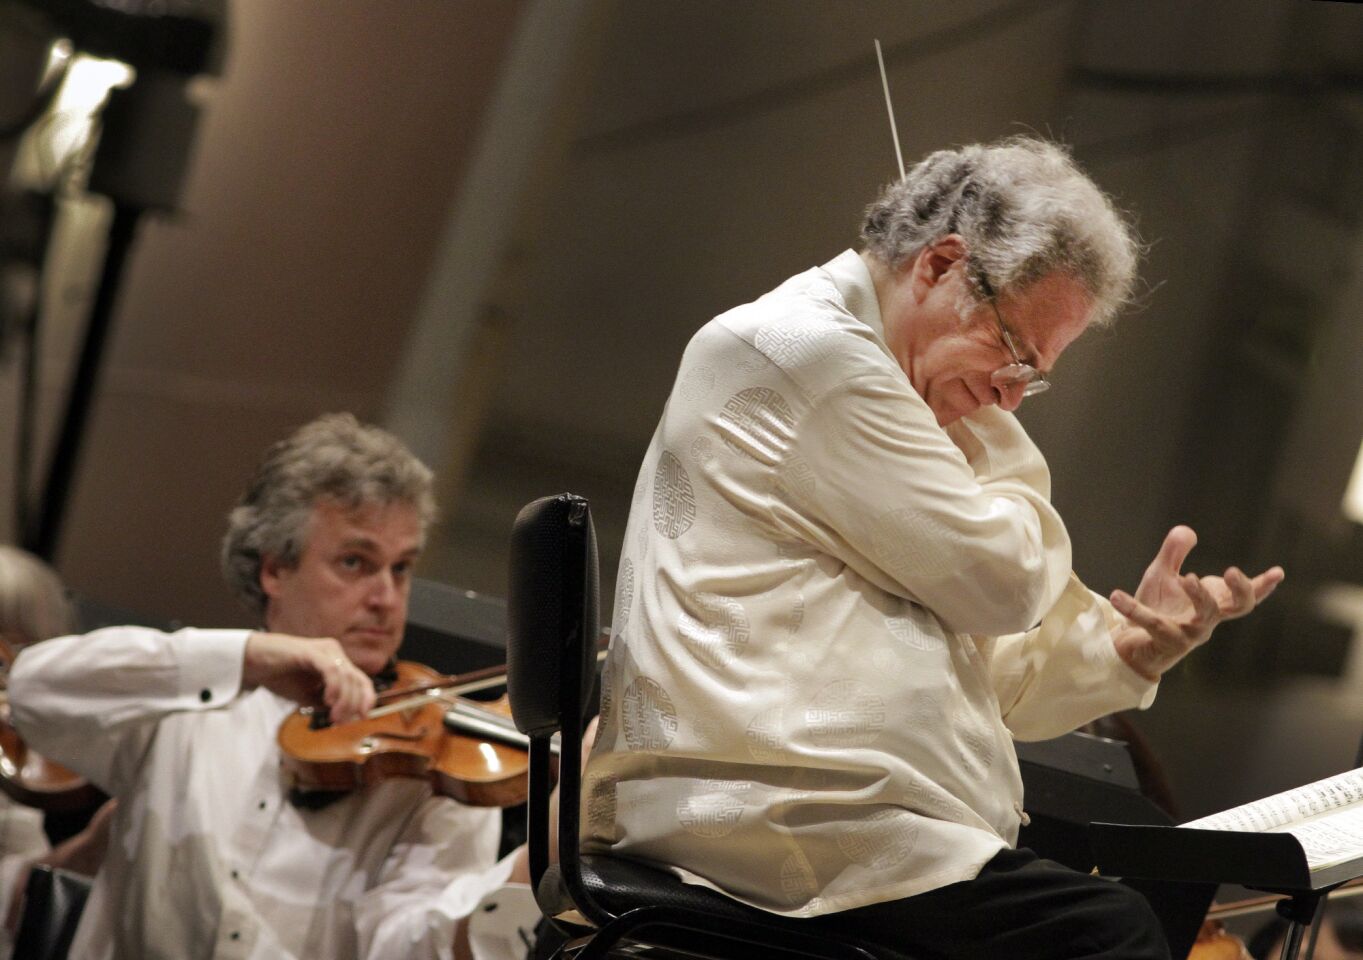 Arts and culture in pictures by The Times | Itzhak Perlman at the Hollywood Bowl